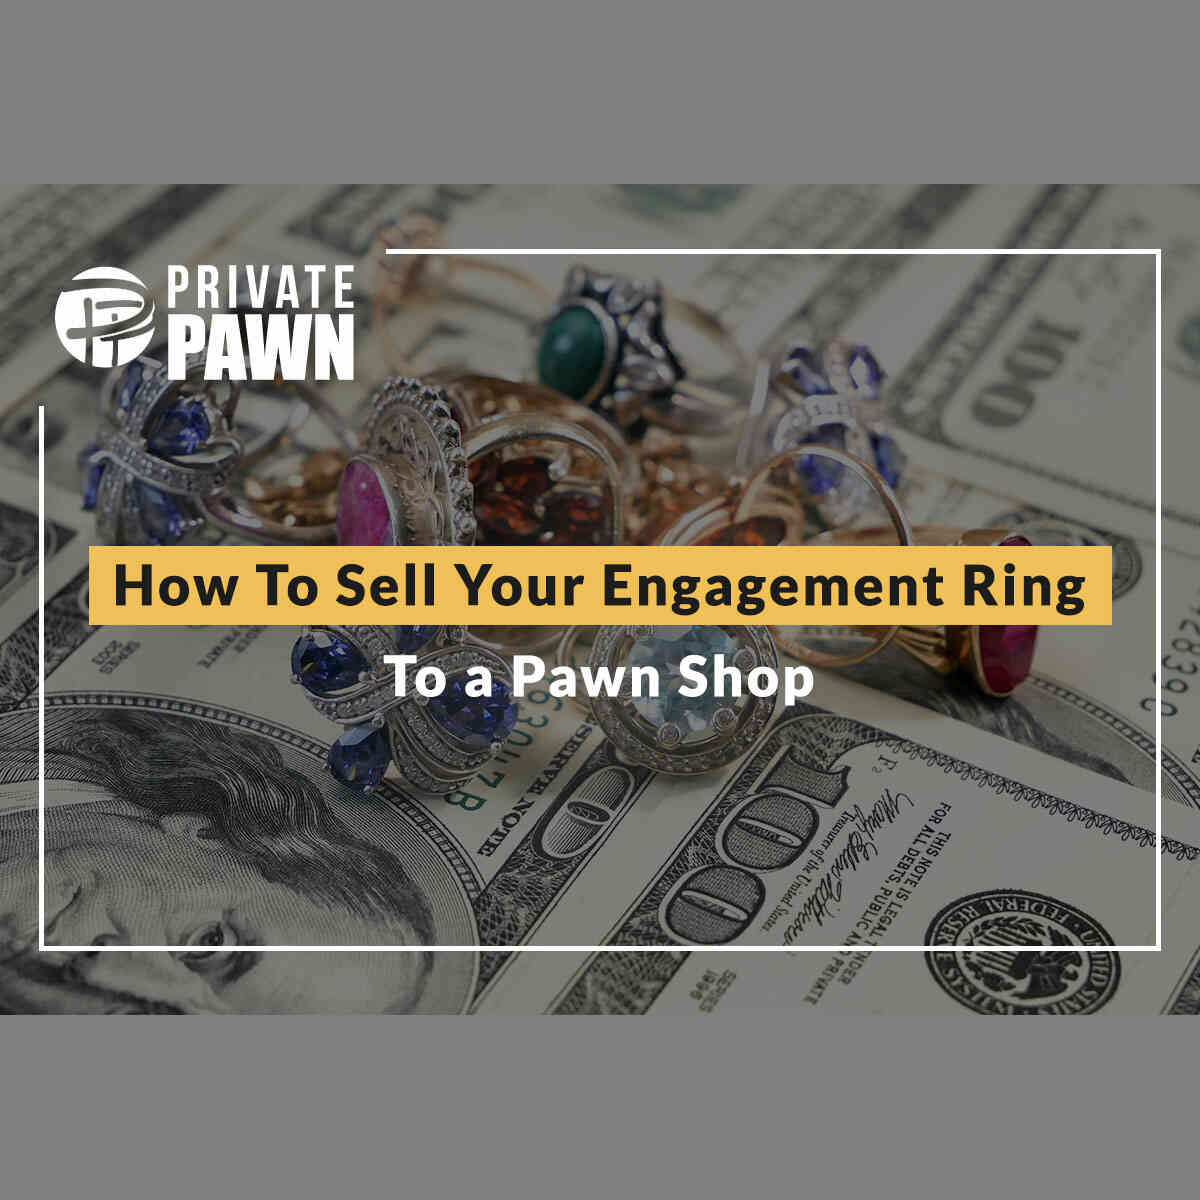 How To Sell Your Engagement Ring To a Pawn Shop